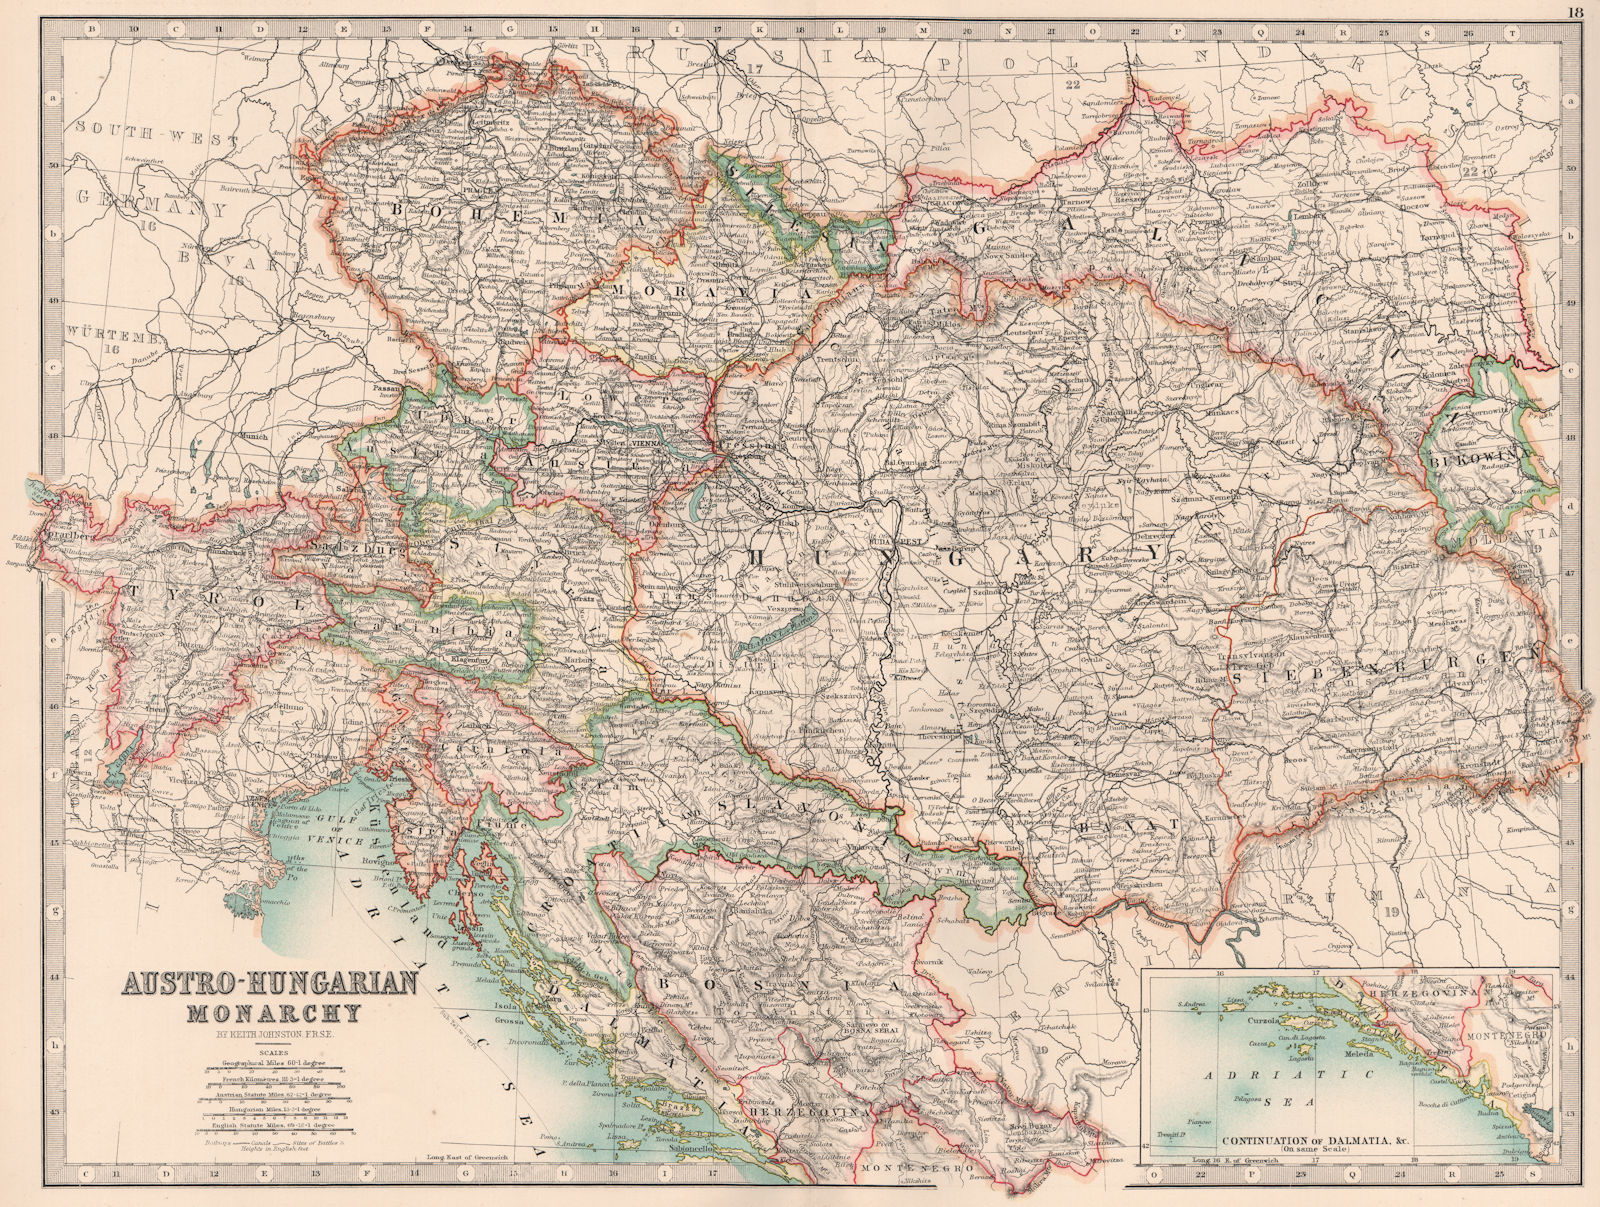 AUSTRO-HUNGARIAN MONARCHY. Provinces Railways Canals. JOHNSTON 1906 old map